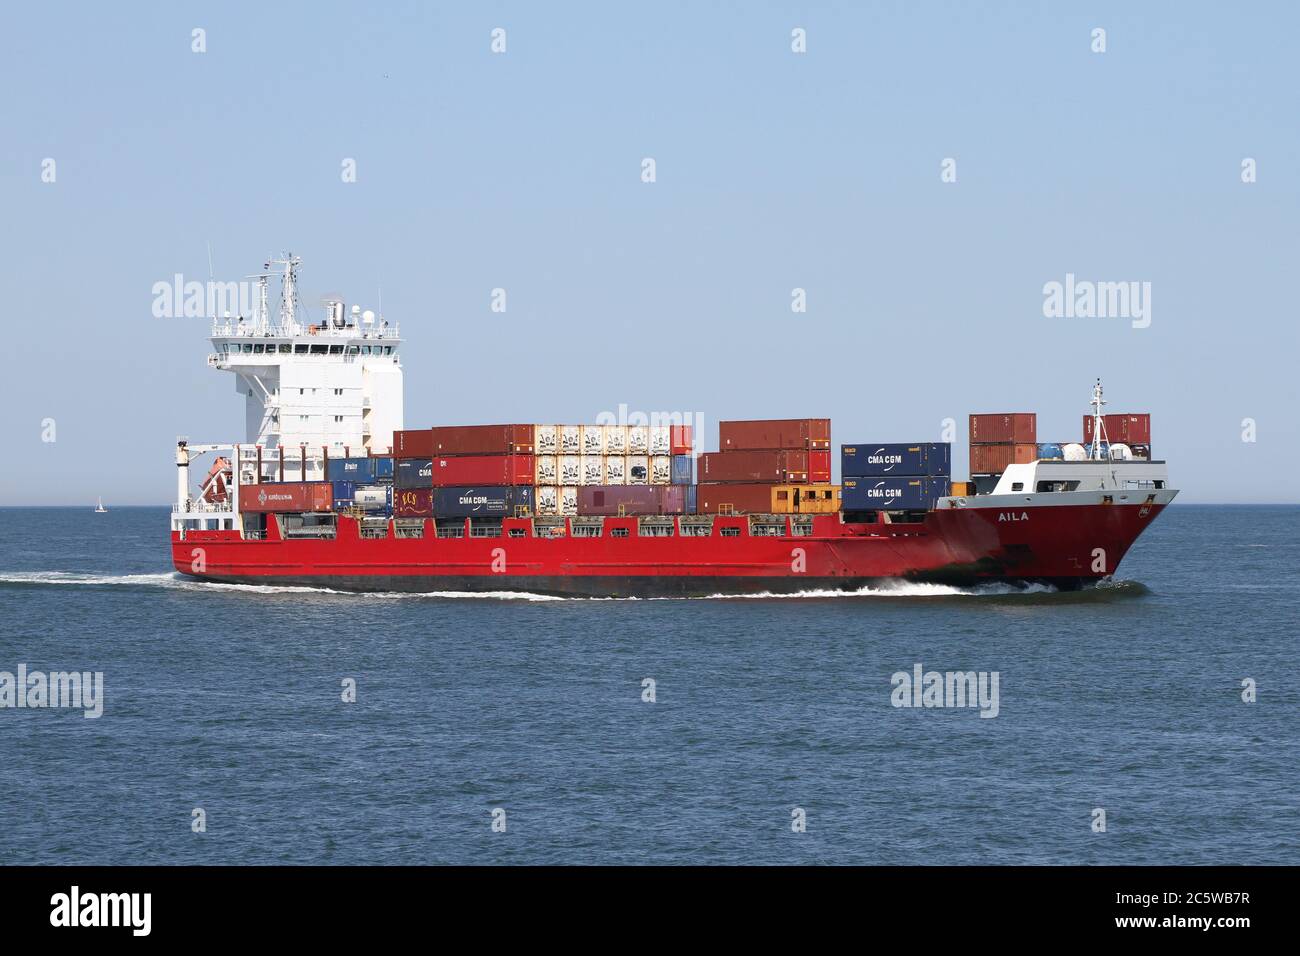 The feeder ship Aila will reach the port of Rotterdam on May 30, 2020. Stock Photo